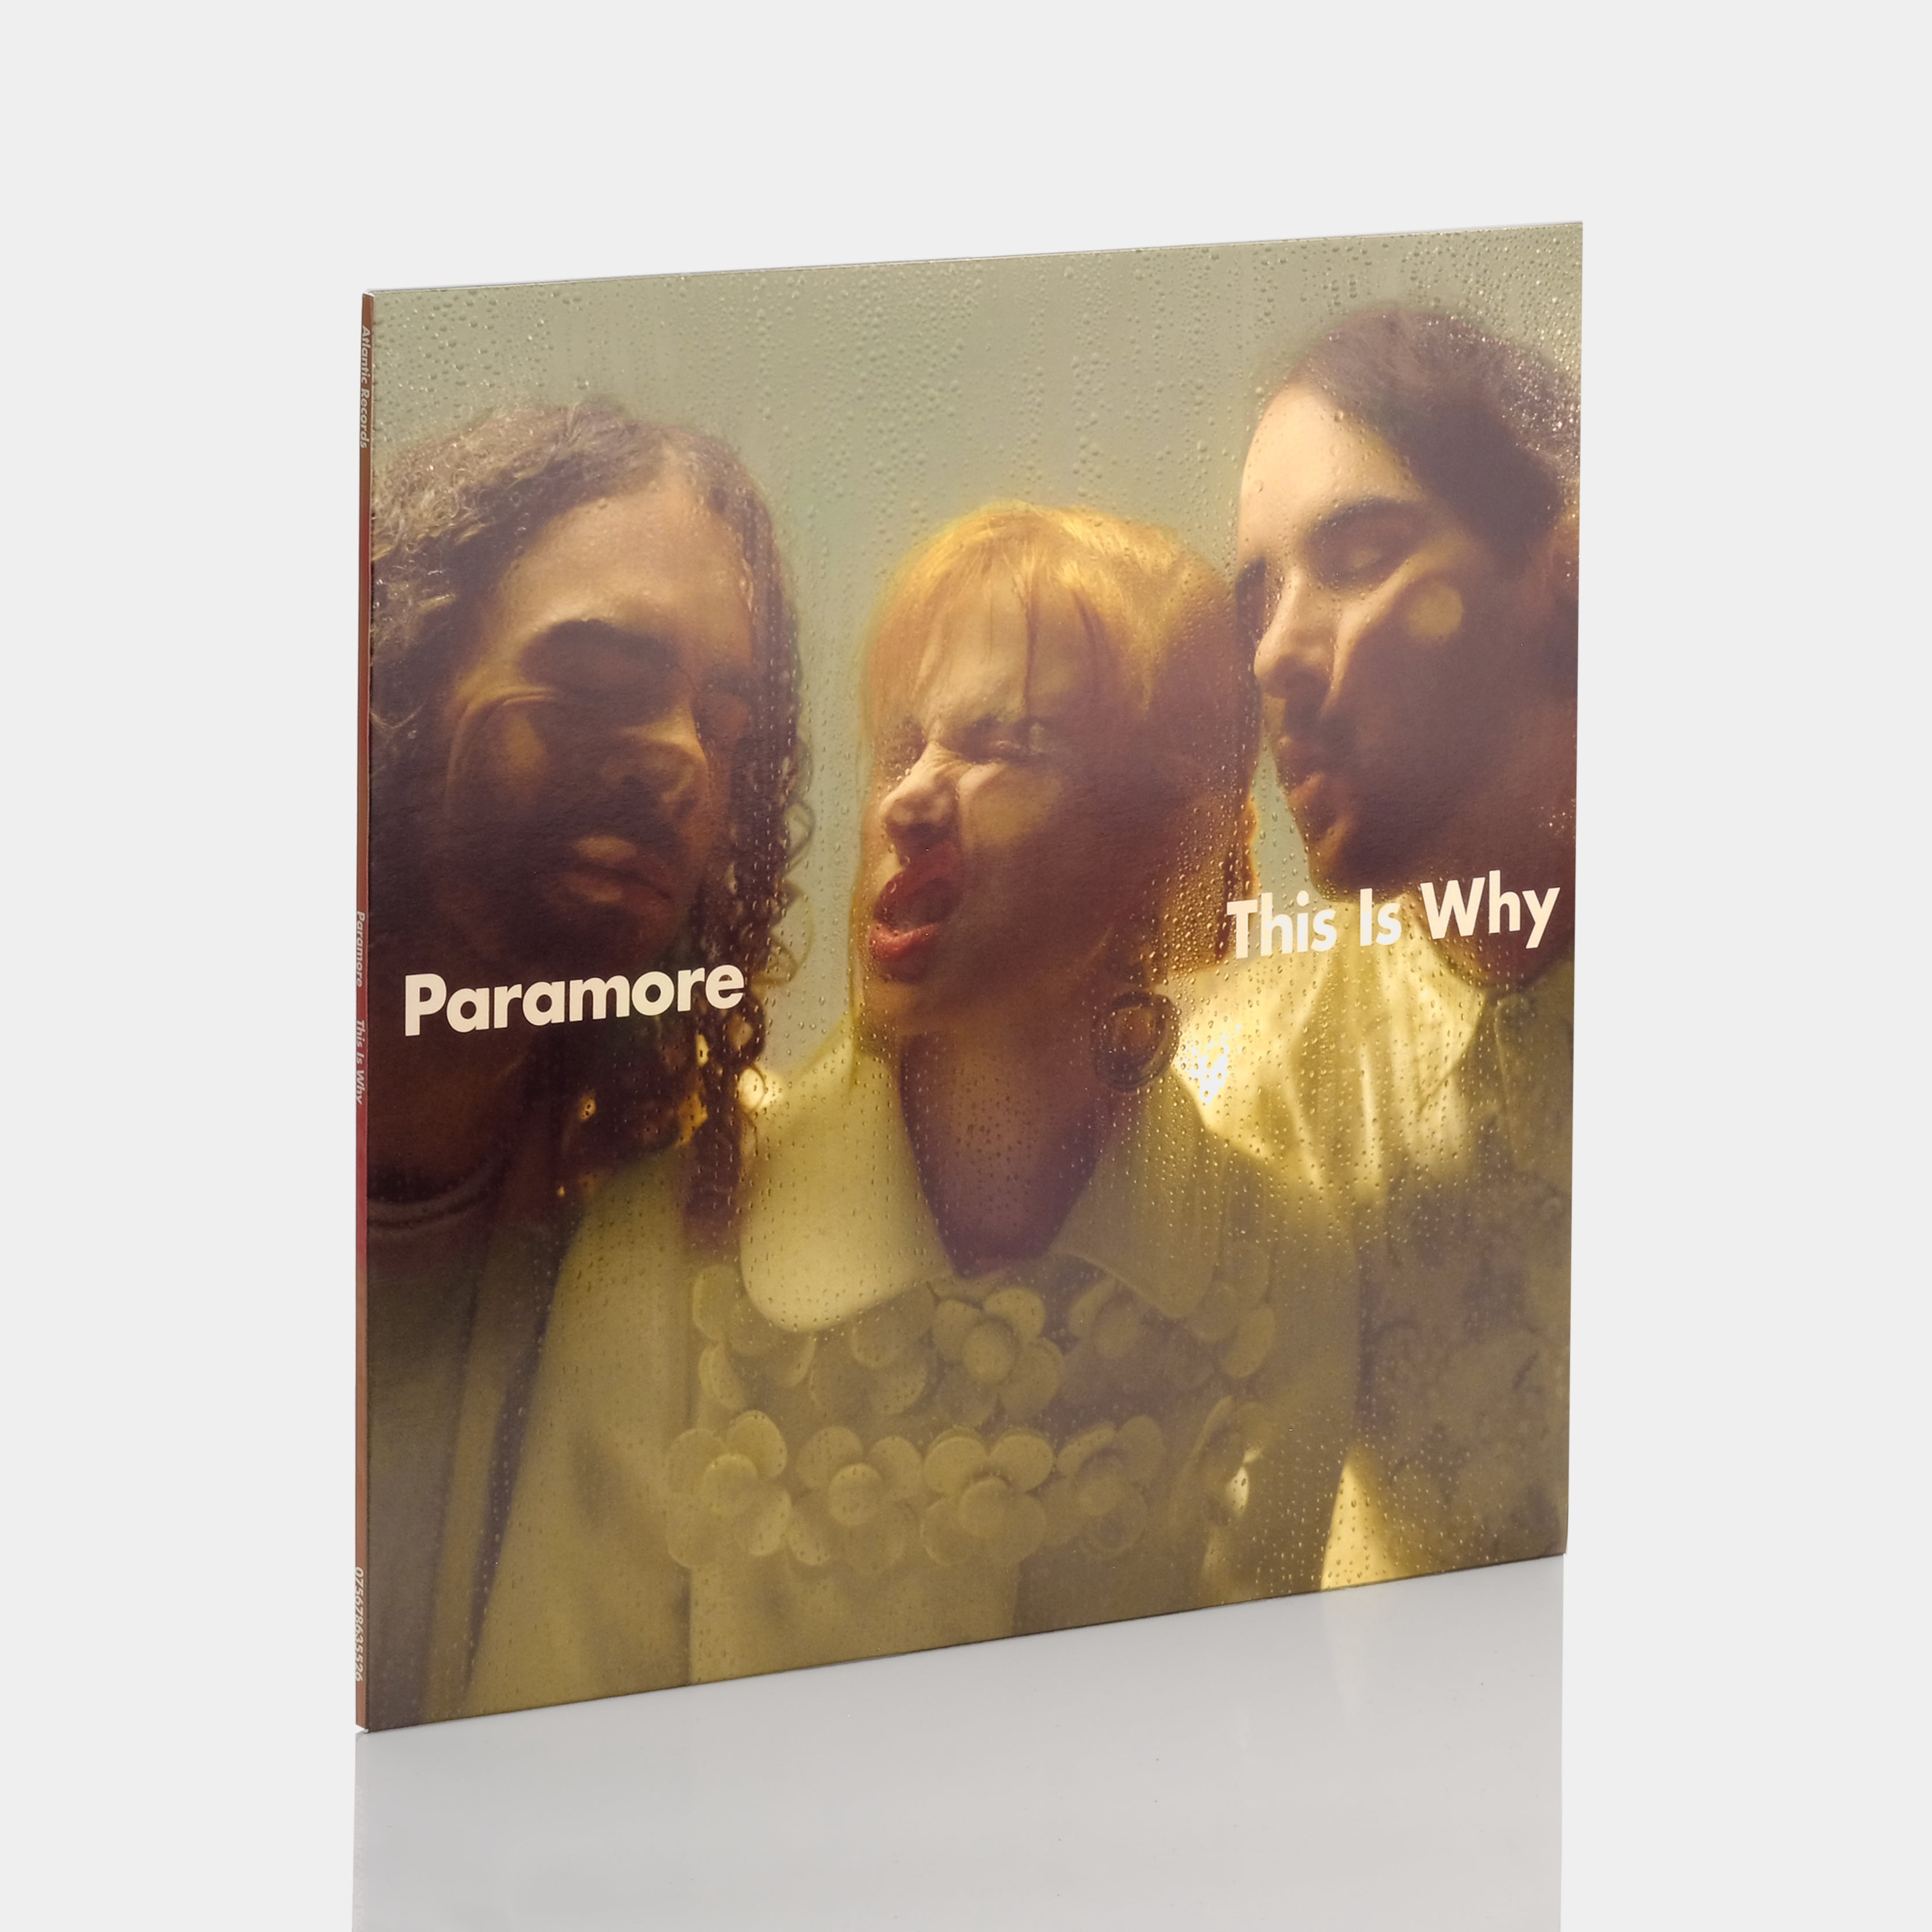 Paramore - This Is Why LP Clear Vinyl Record